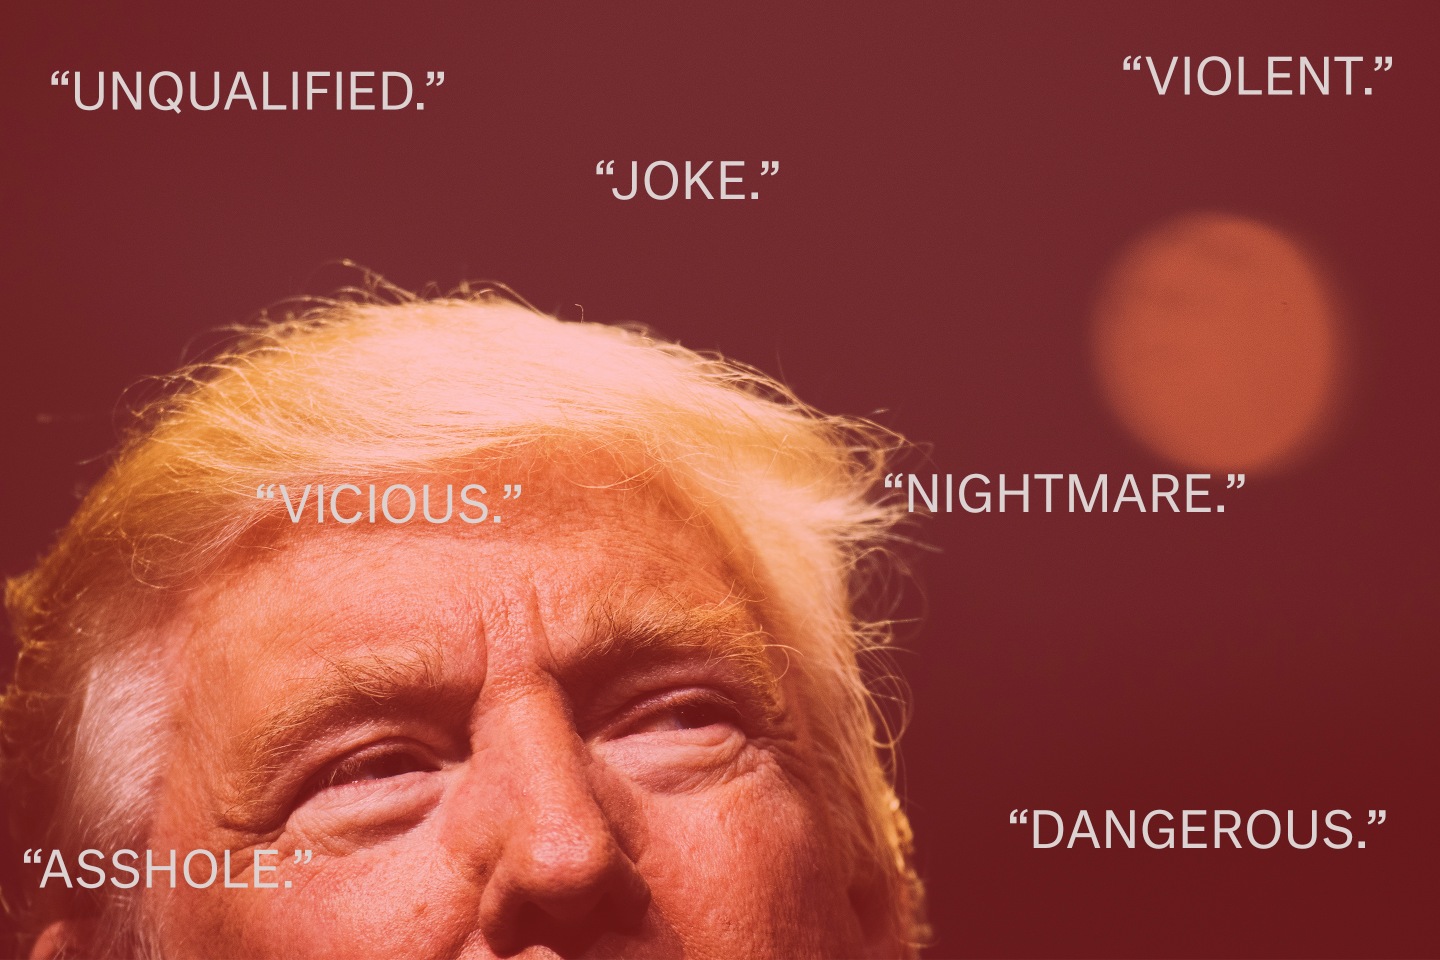 43 Artists On Why Donald Trump Is Bad For America